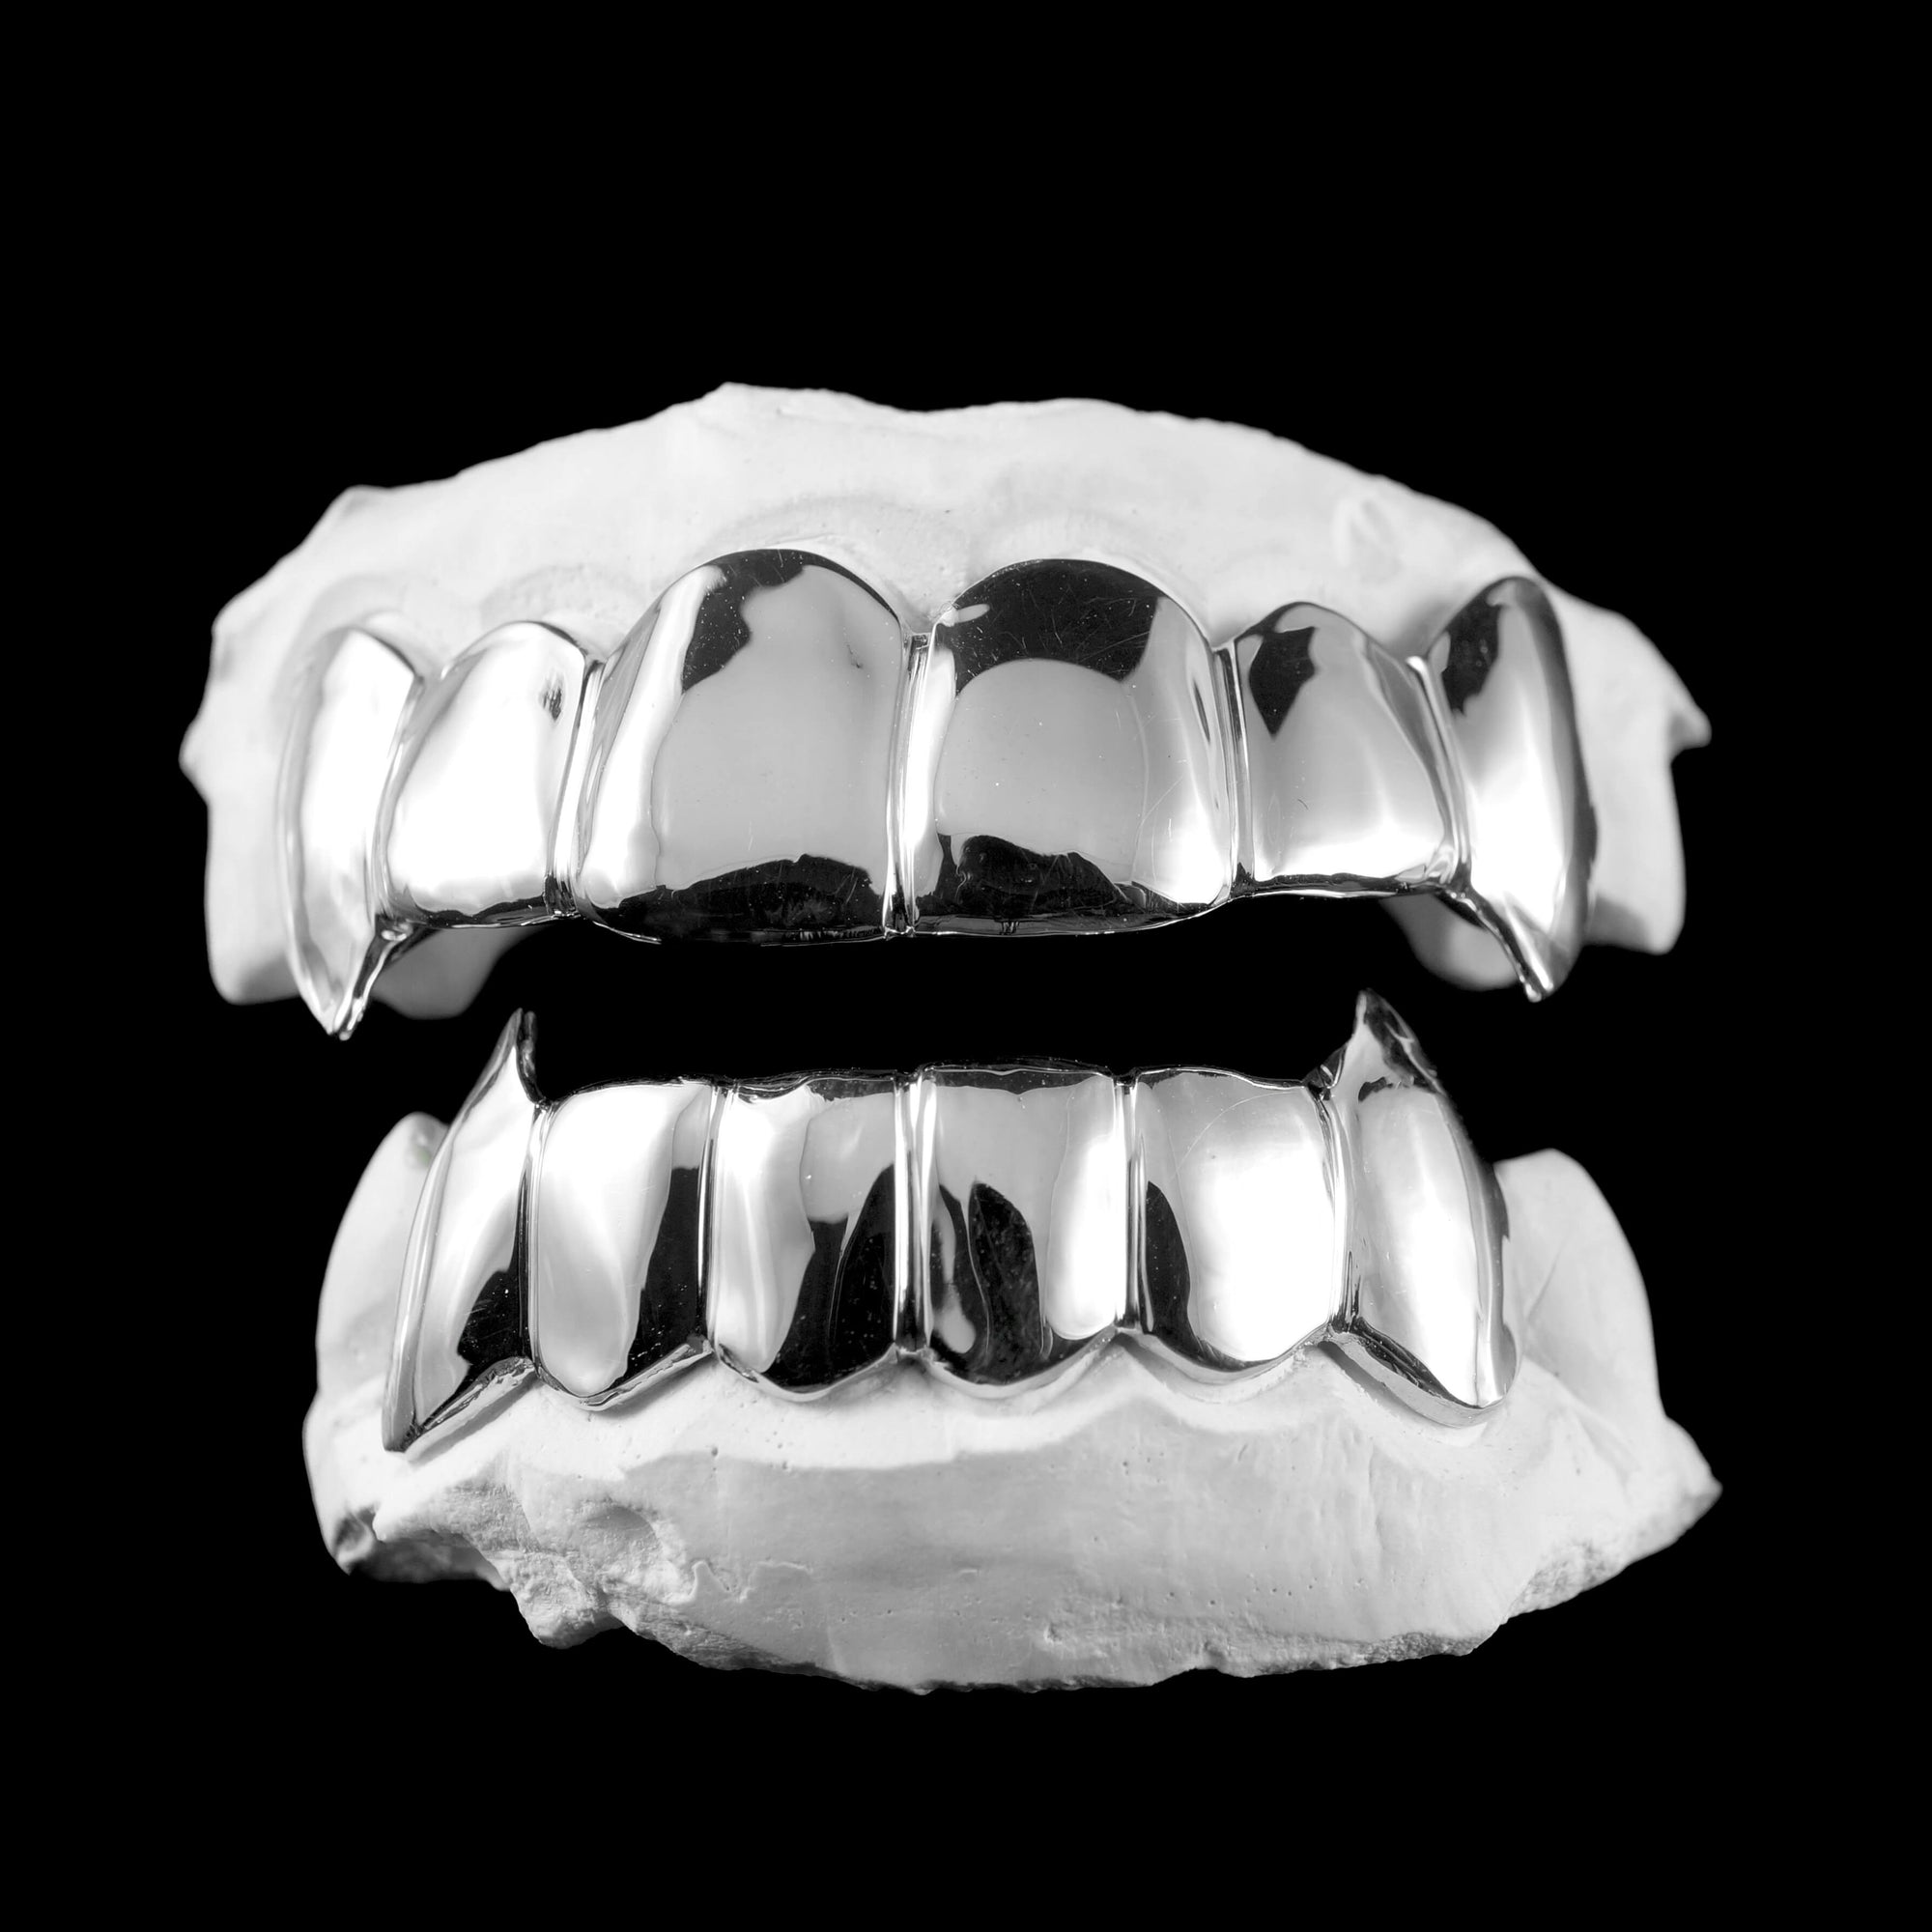 Silver Solid Fanged Grillz